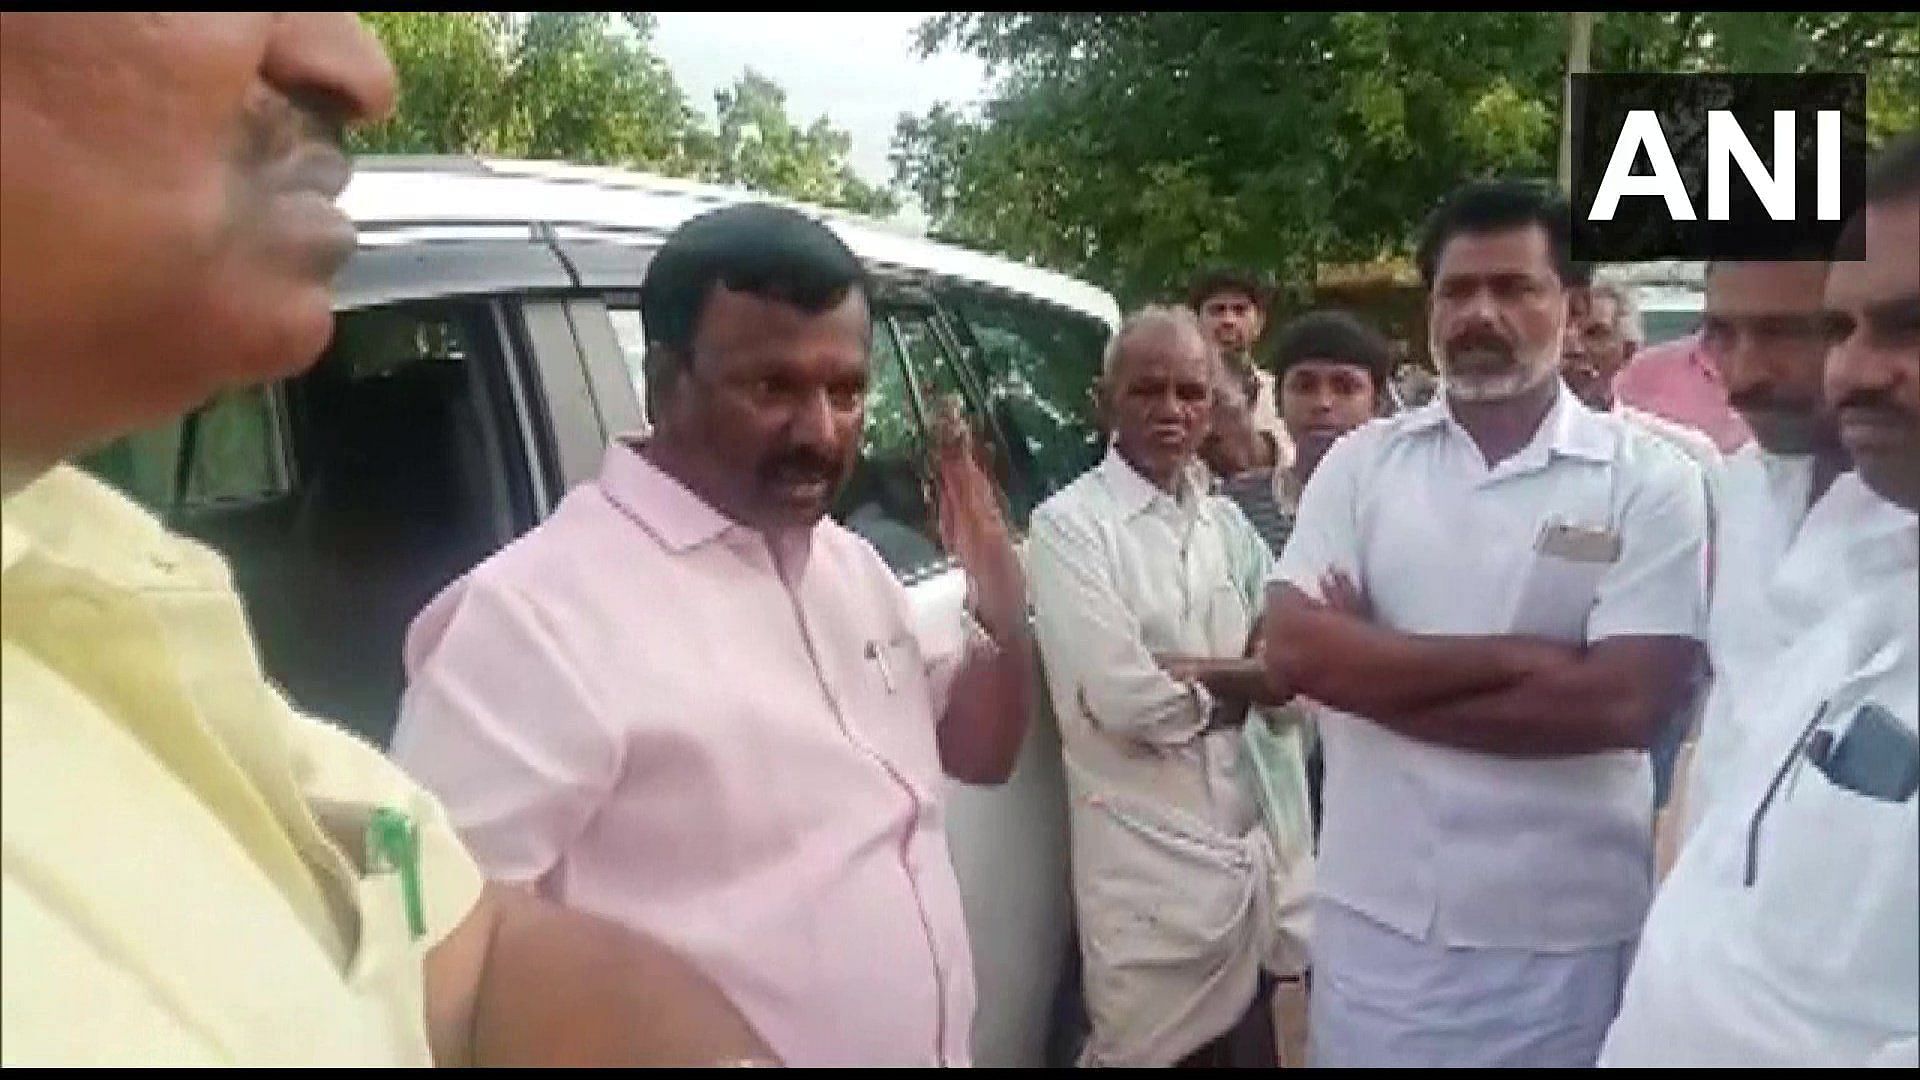 A Narayanaswamy was denied entry into a settlement of the Golla community in Karnataka on Monday.&nbsp;